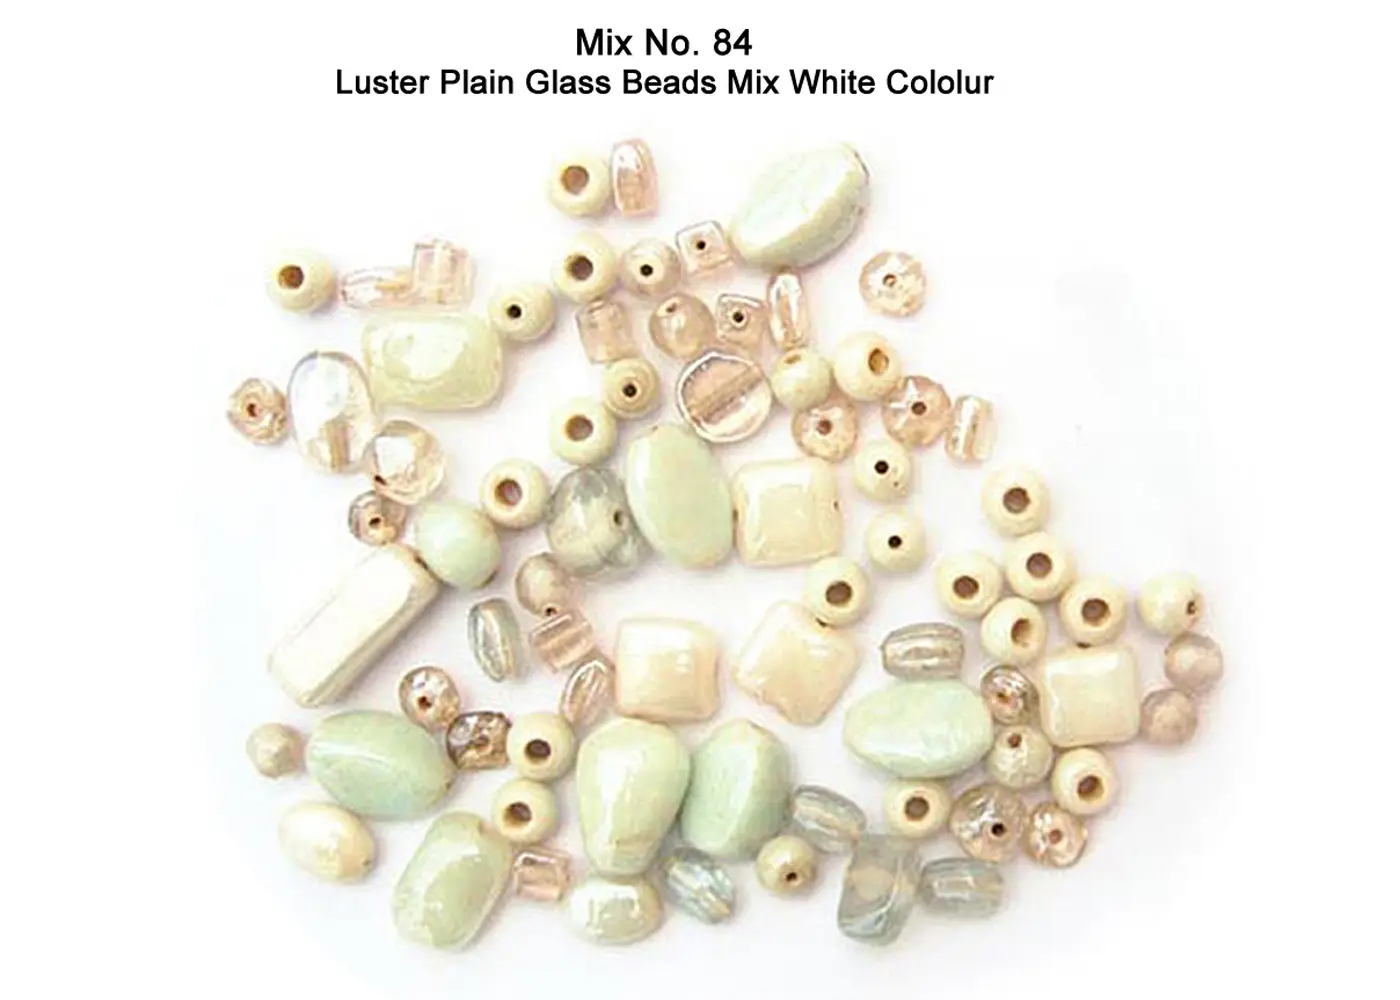 Luster Plain Beads in White color